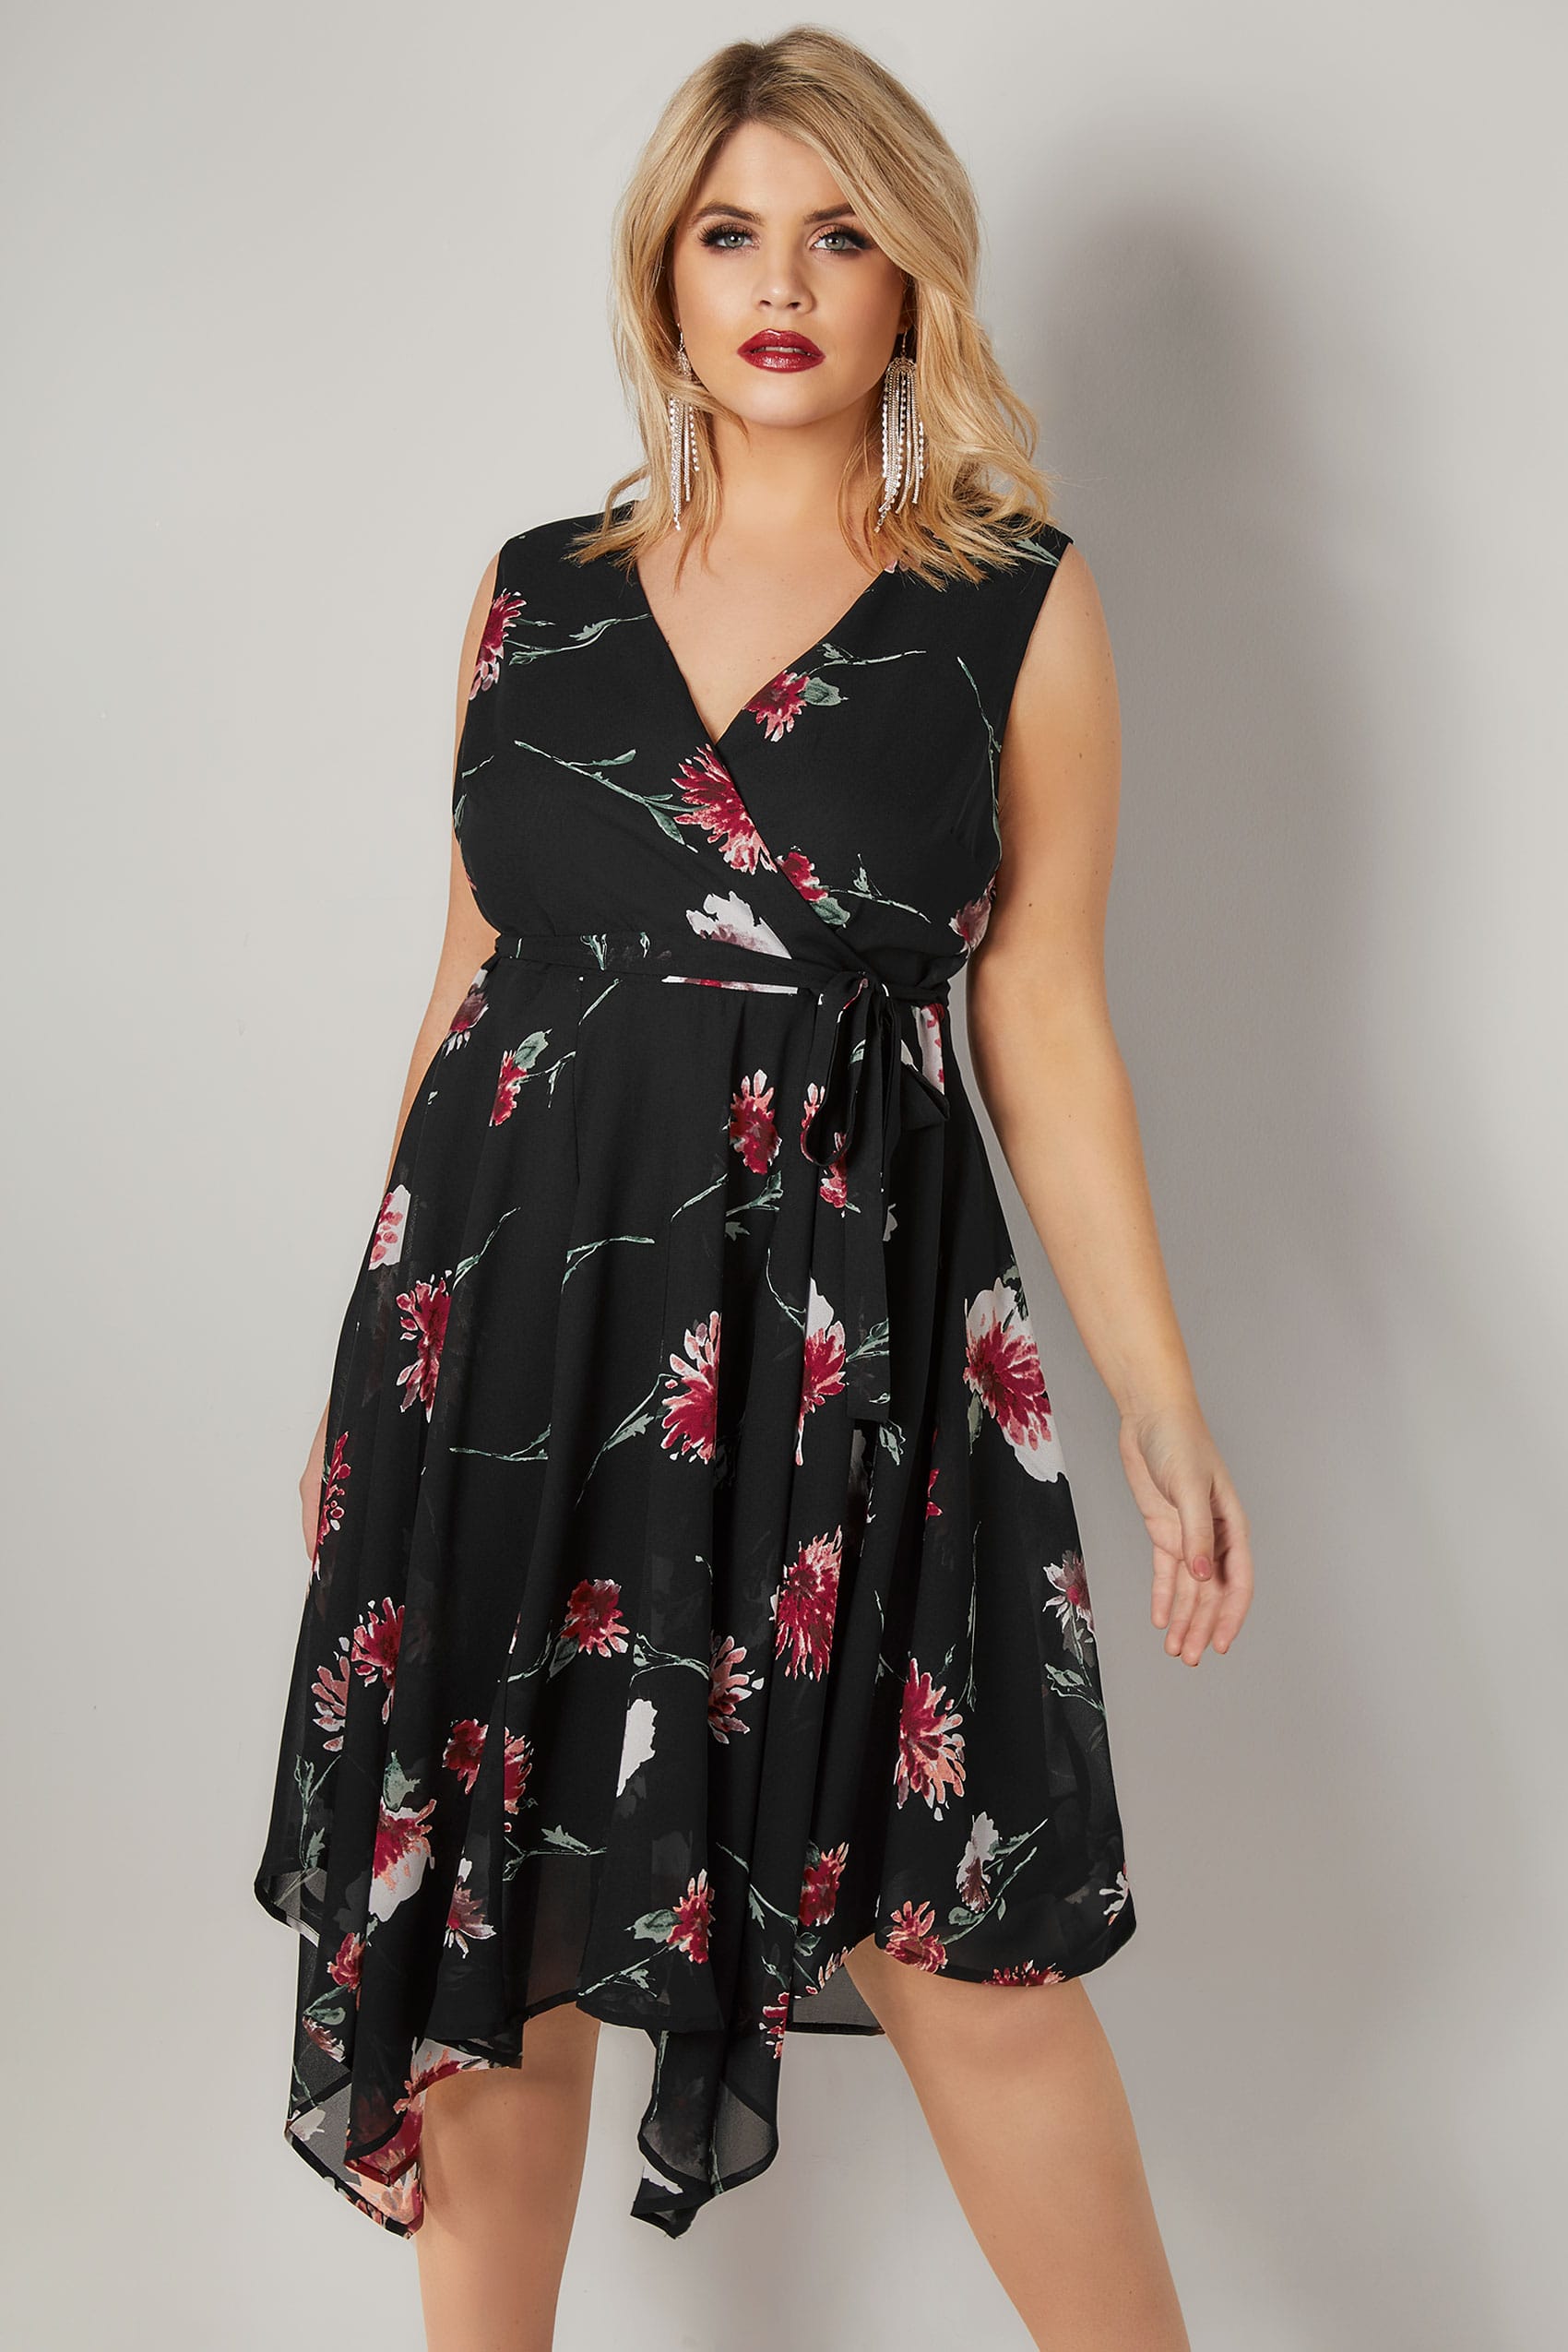 Black & Red Floral Print Wrap Dress With Hanky Hem, plus size 16 to 36